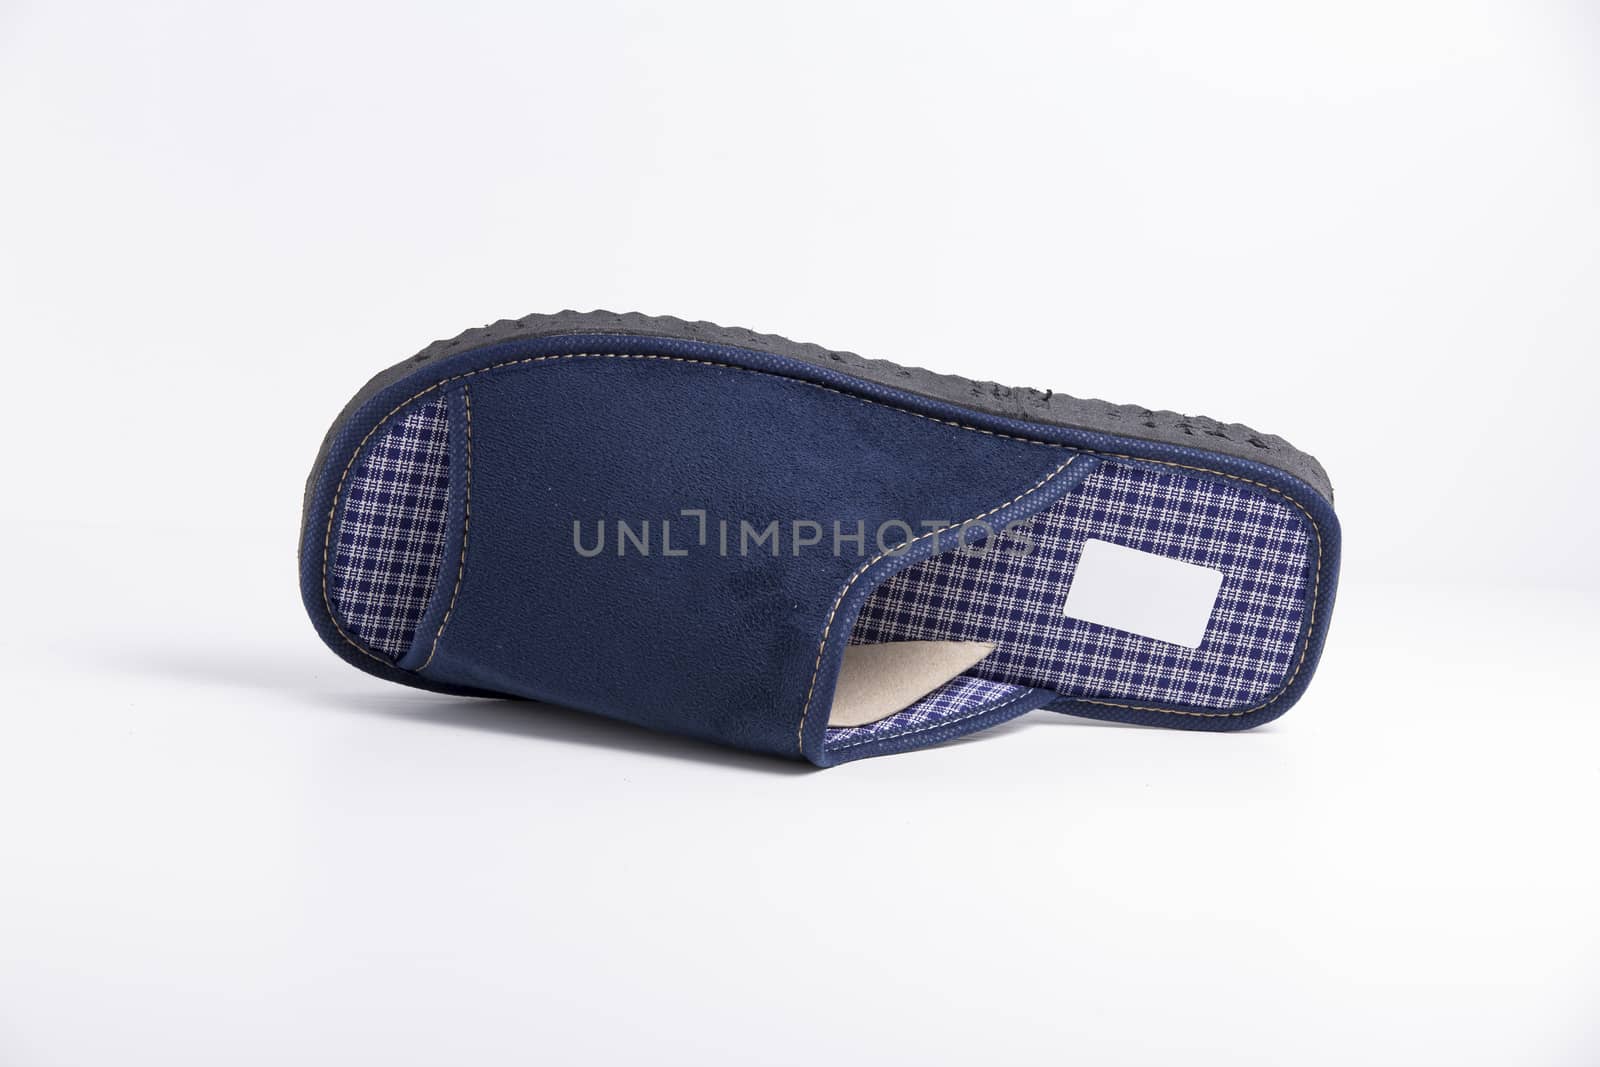 Male blue slipper on white background, isolated product.